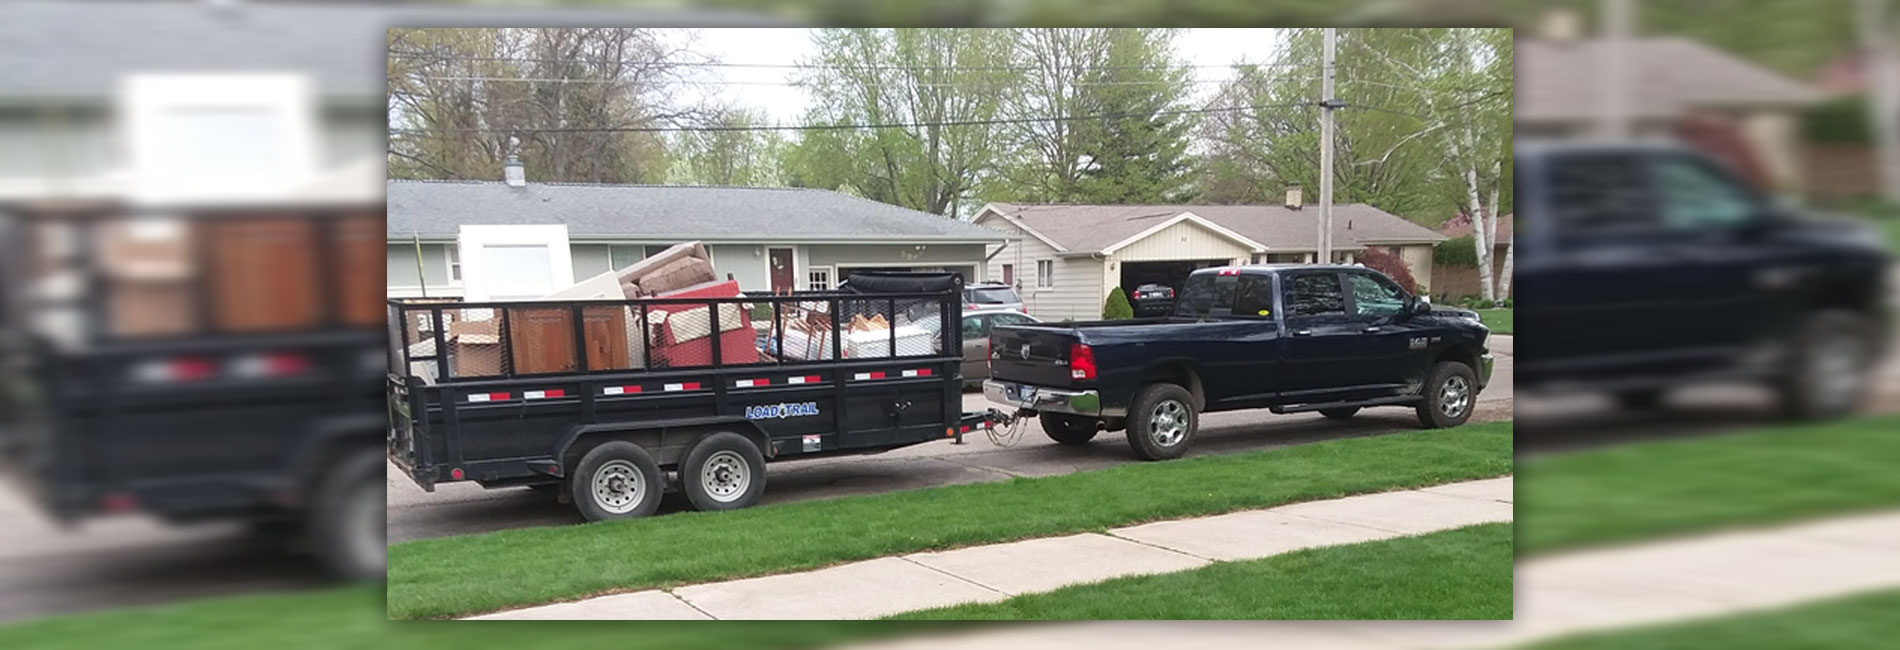 Mike's Junk Hauling - Garbage Removal Holland, MI